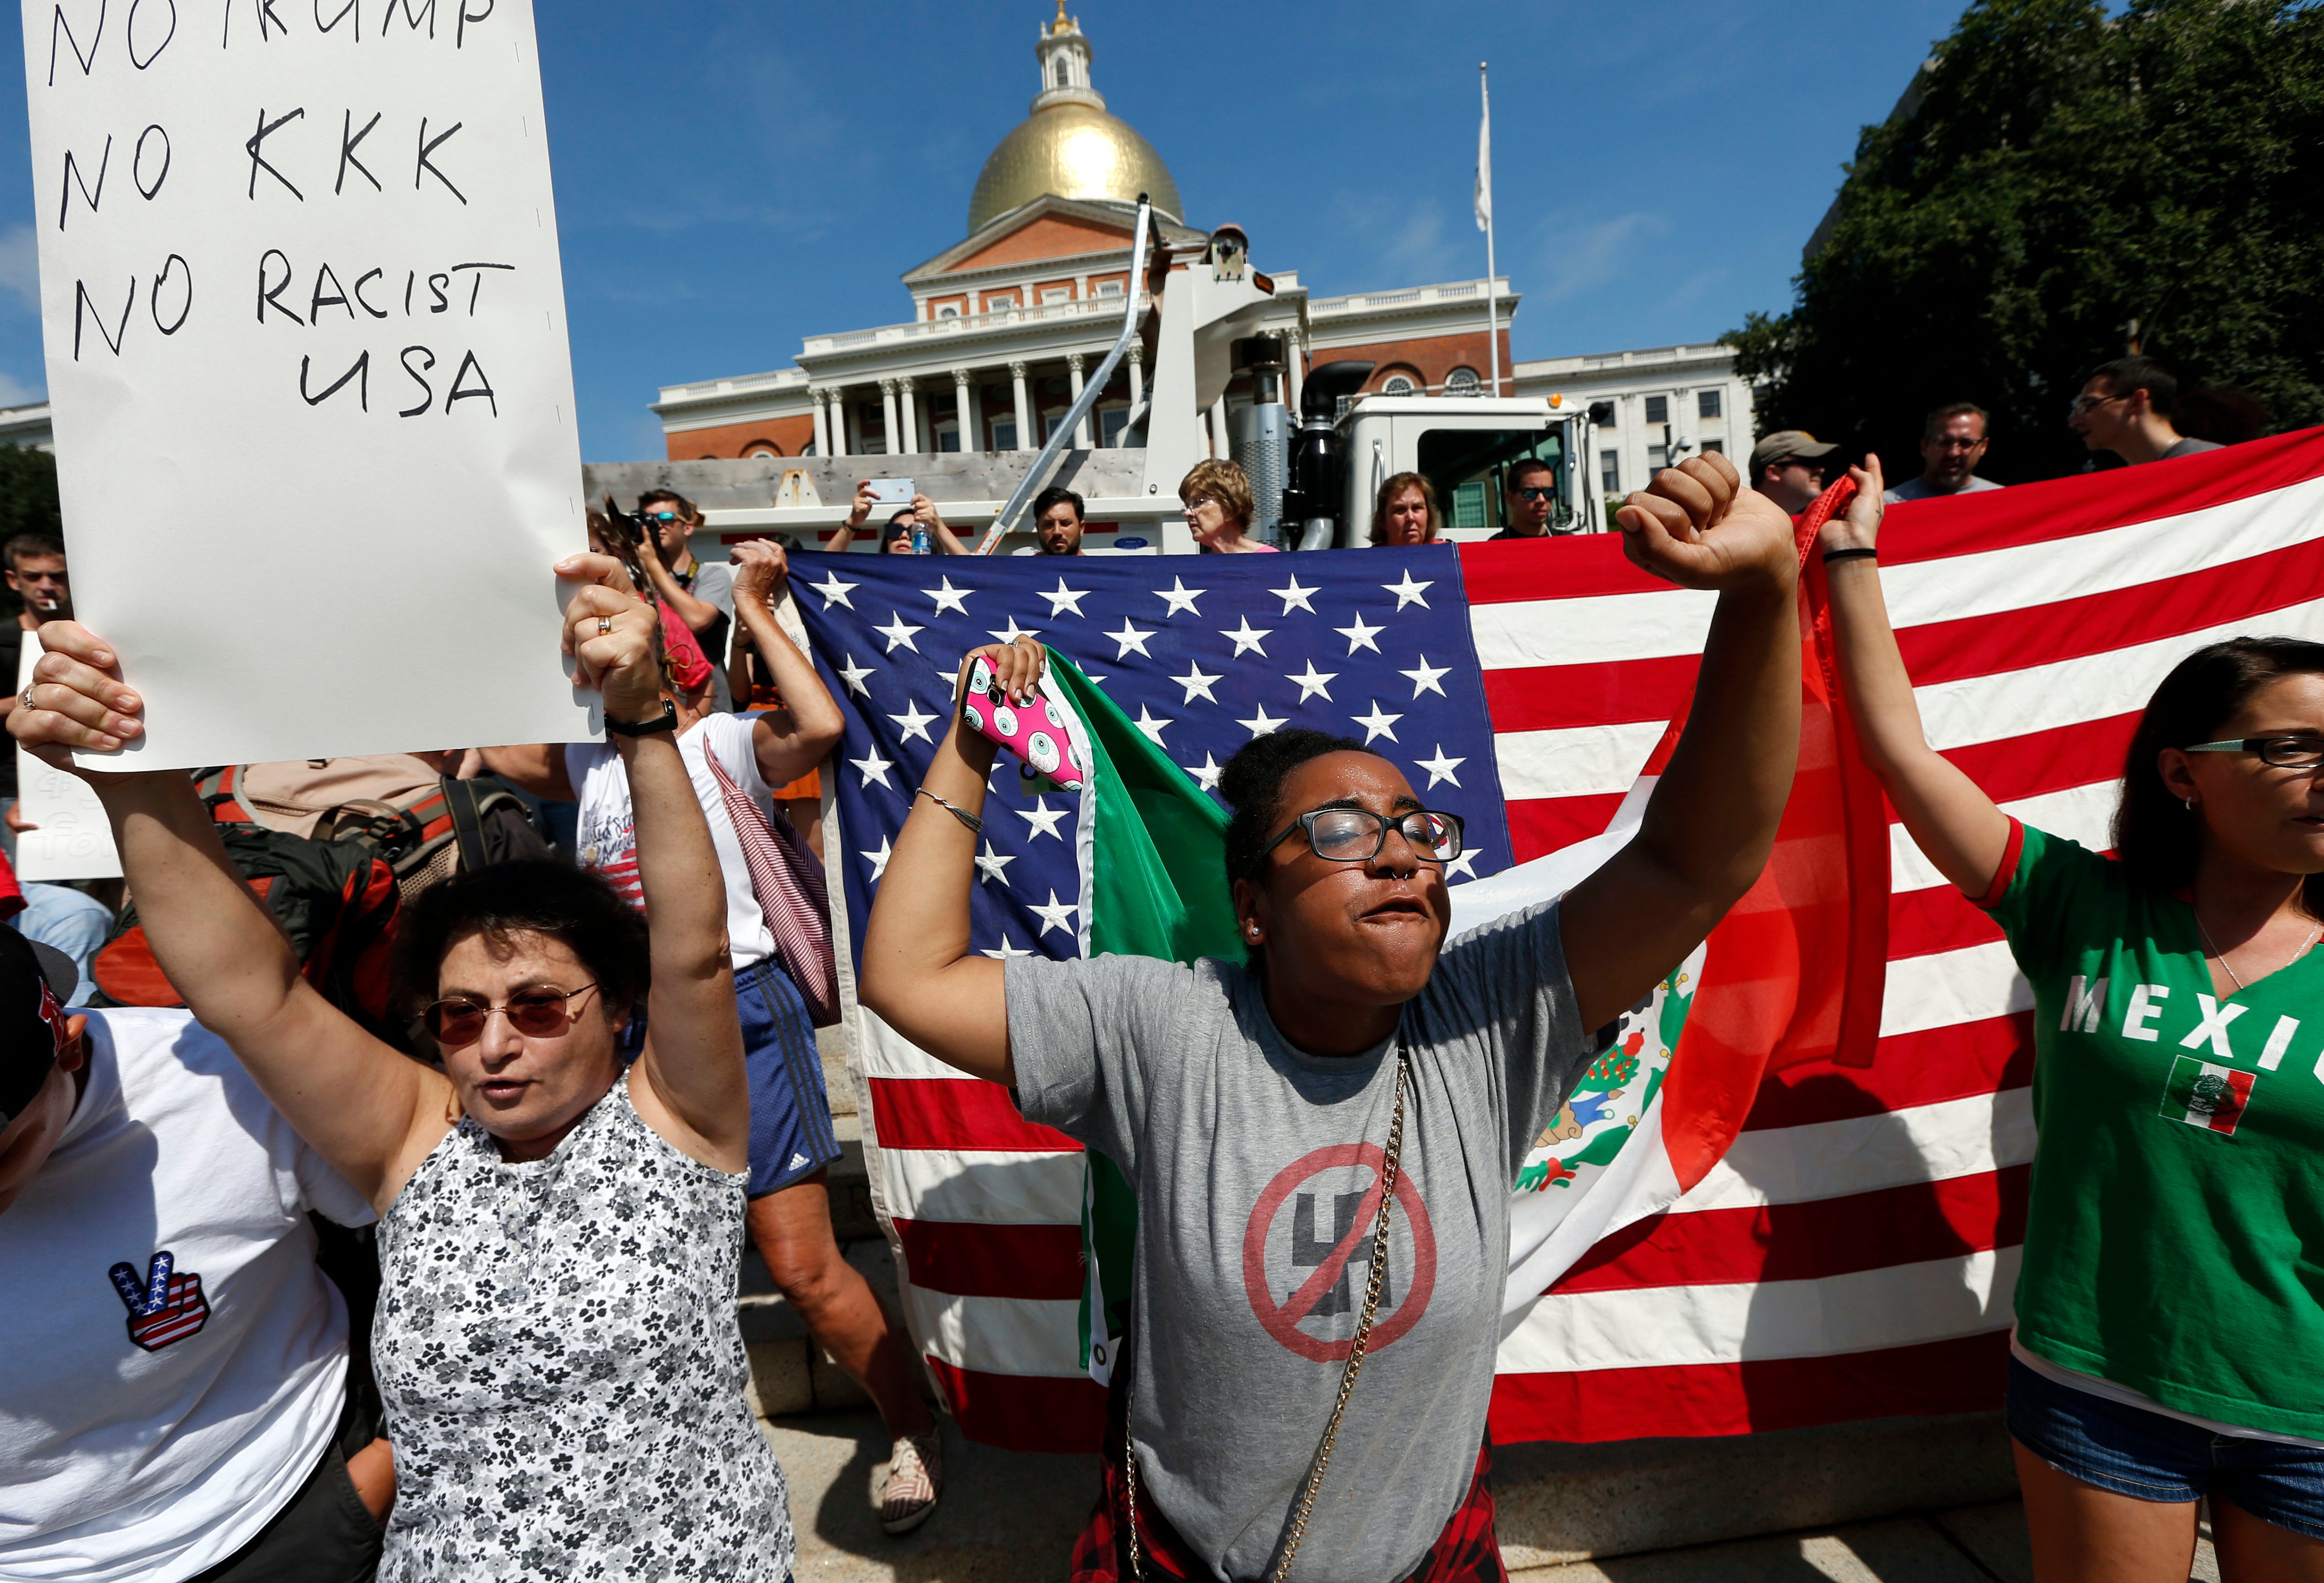 Counter-protesters at the Statehouse before a planned "Free Speech" rally by conservative organizers begins on the adjacent Boston Common on Aug. 19, 2017. (Michael Dwyer—AP)